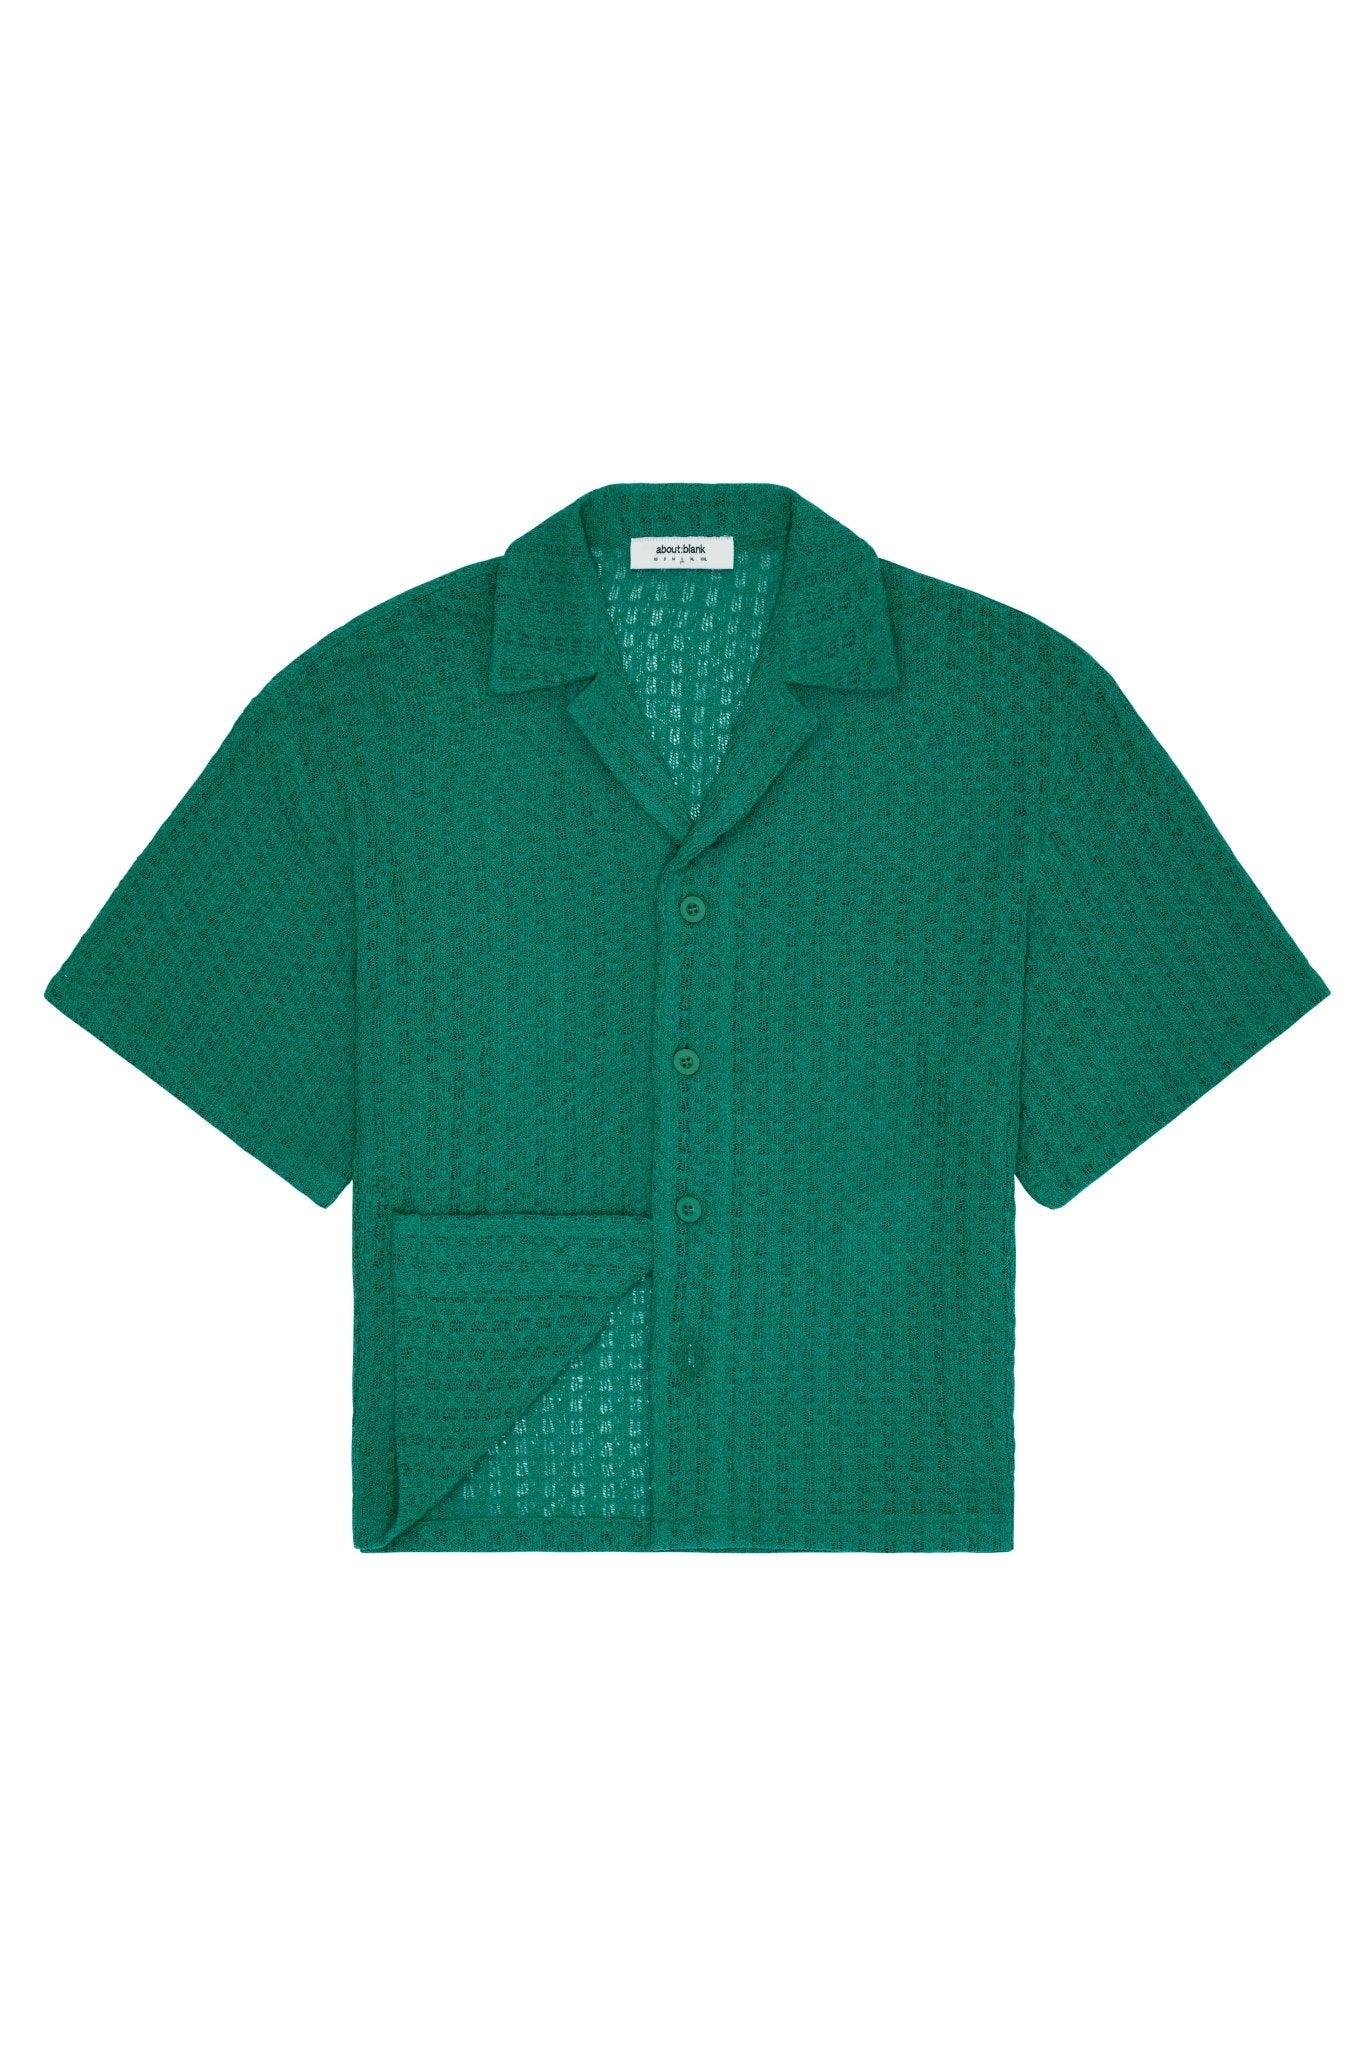 about---blank.comknitted shirt green